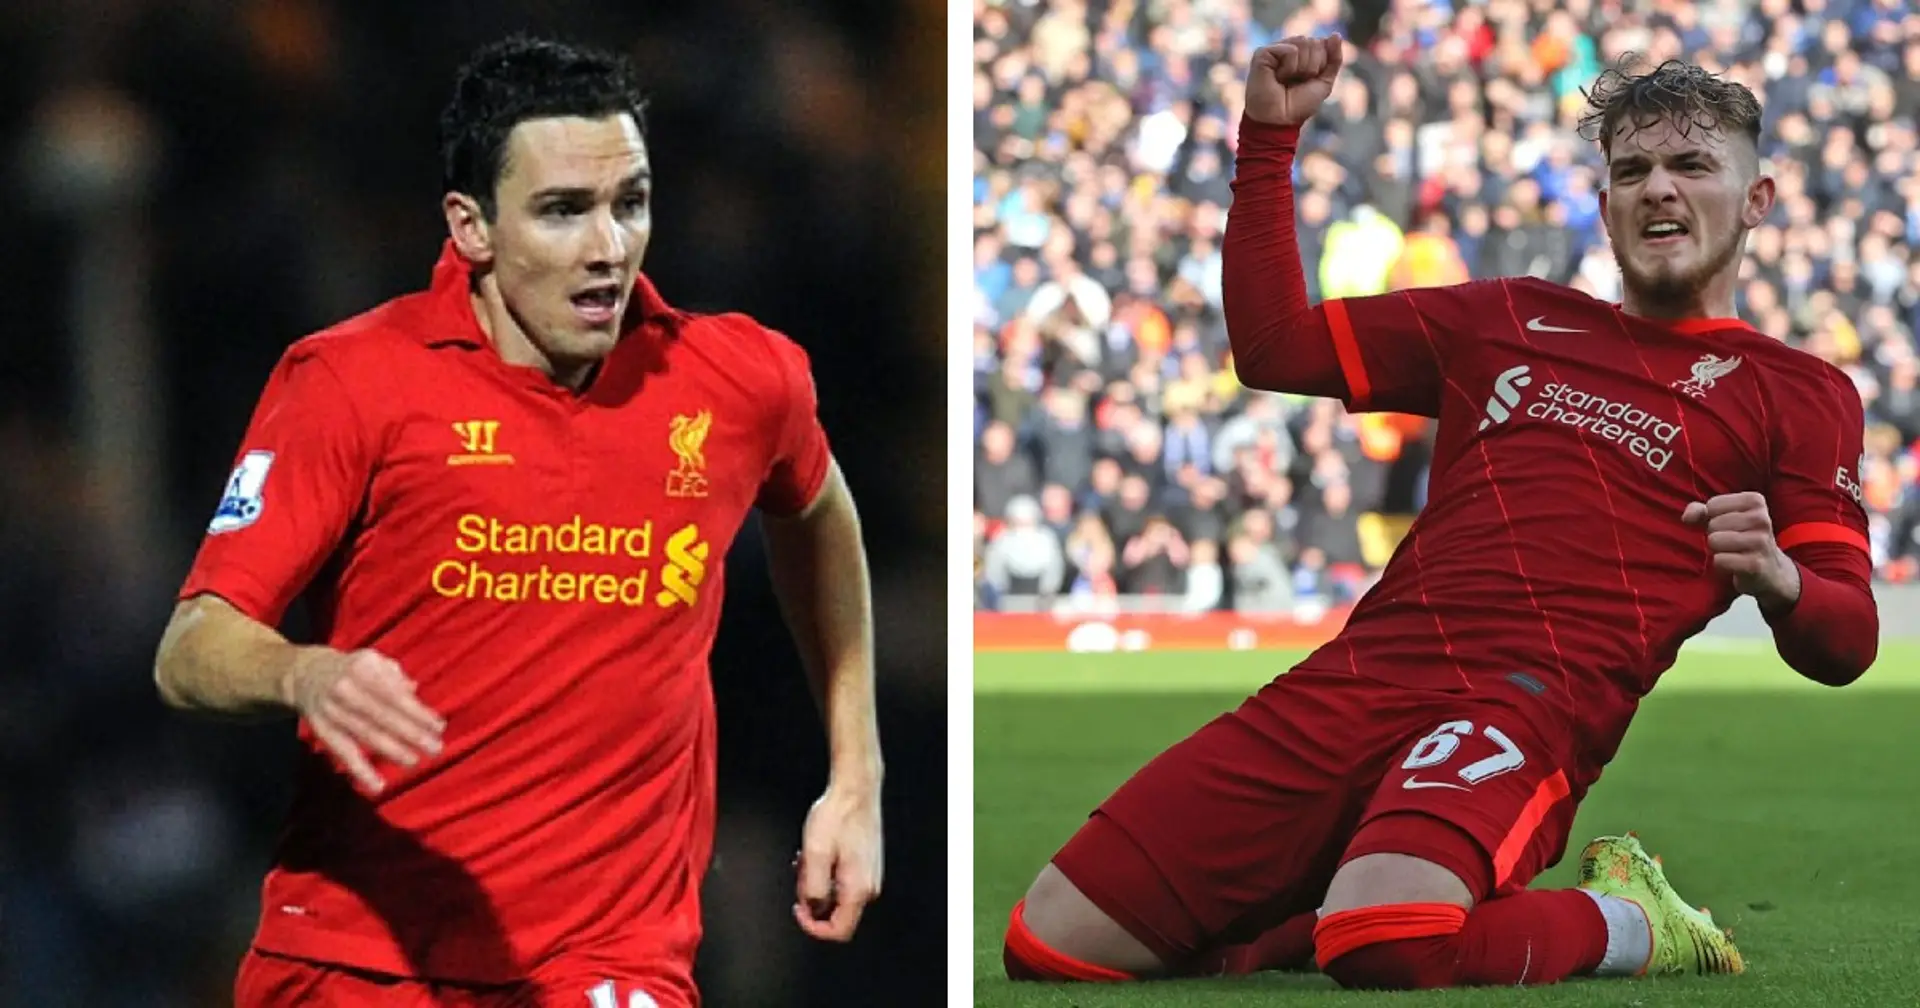 'He’s not a young player who runs everywhere and is undisciplined': Downing provides insight on Elliot progress